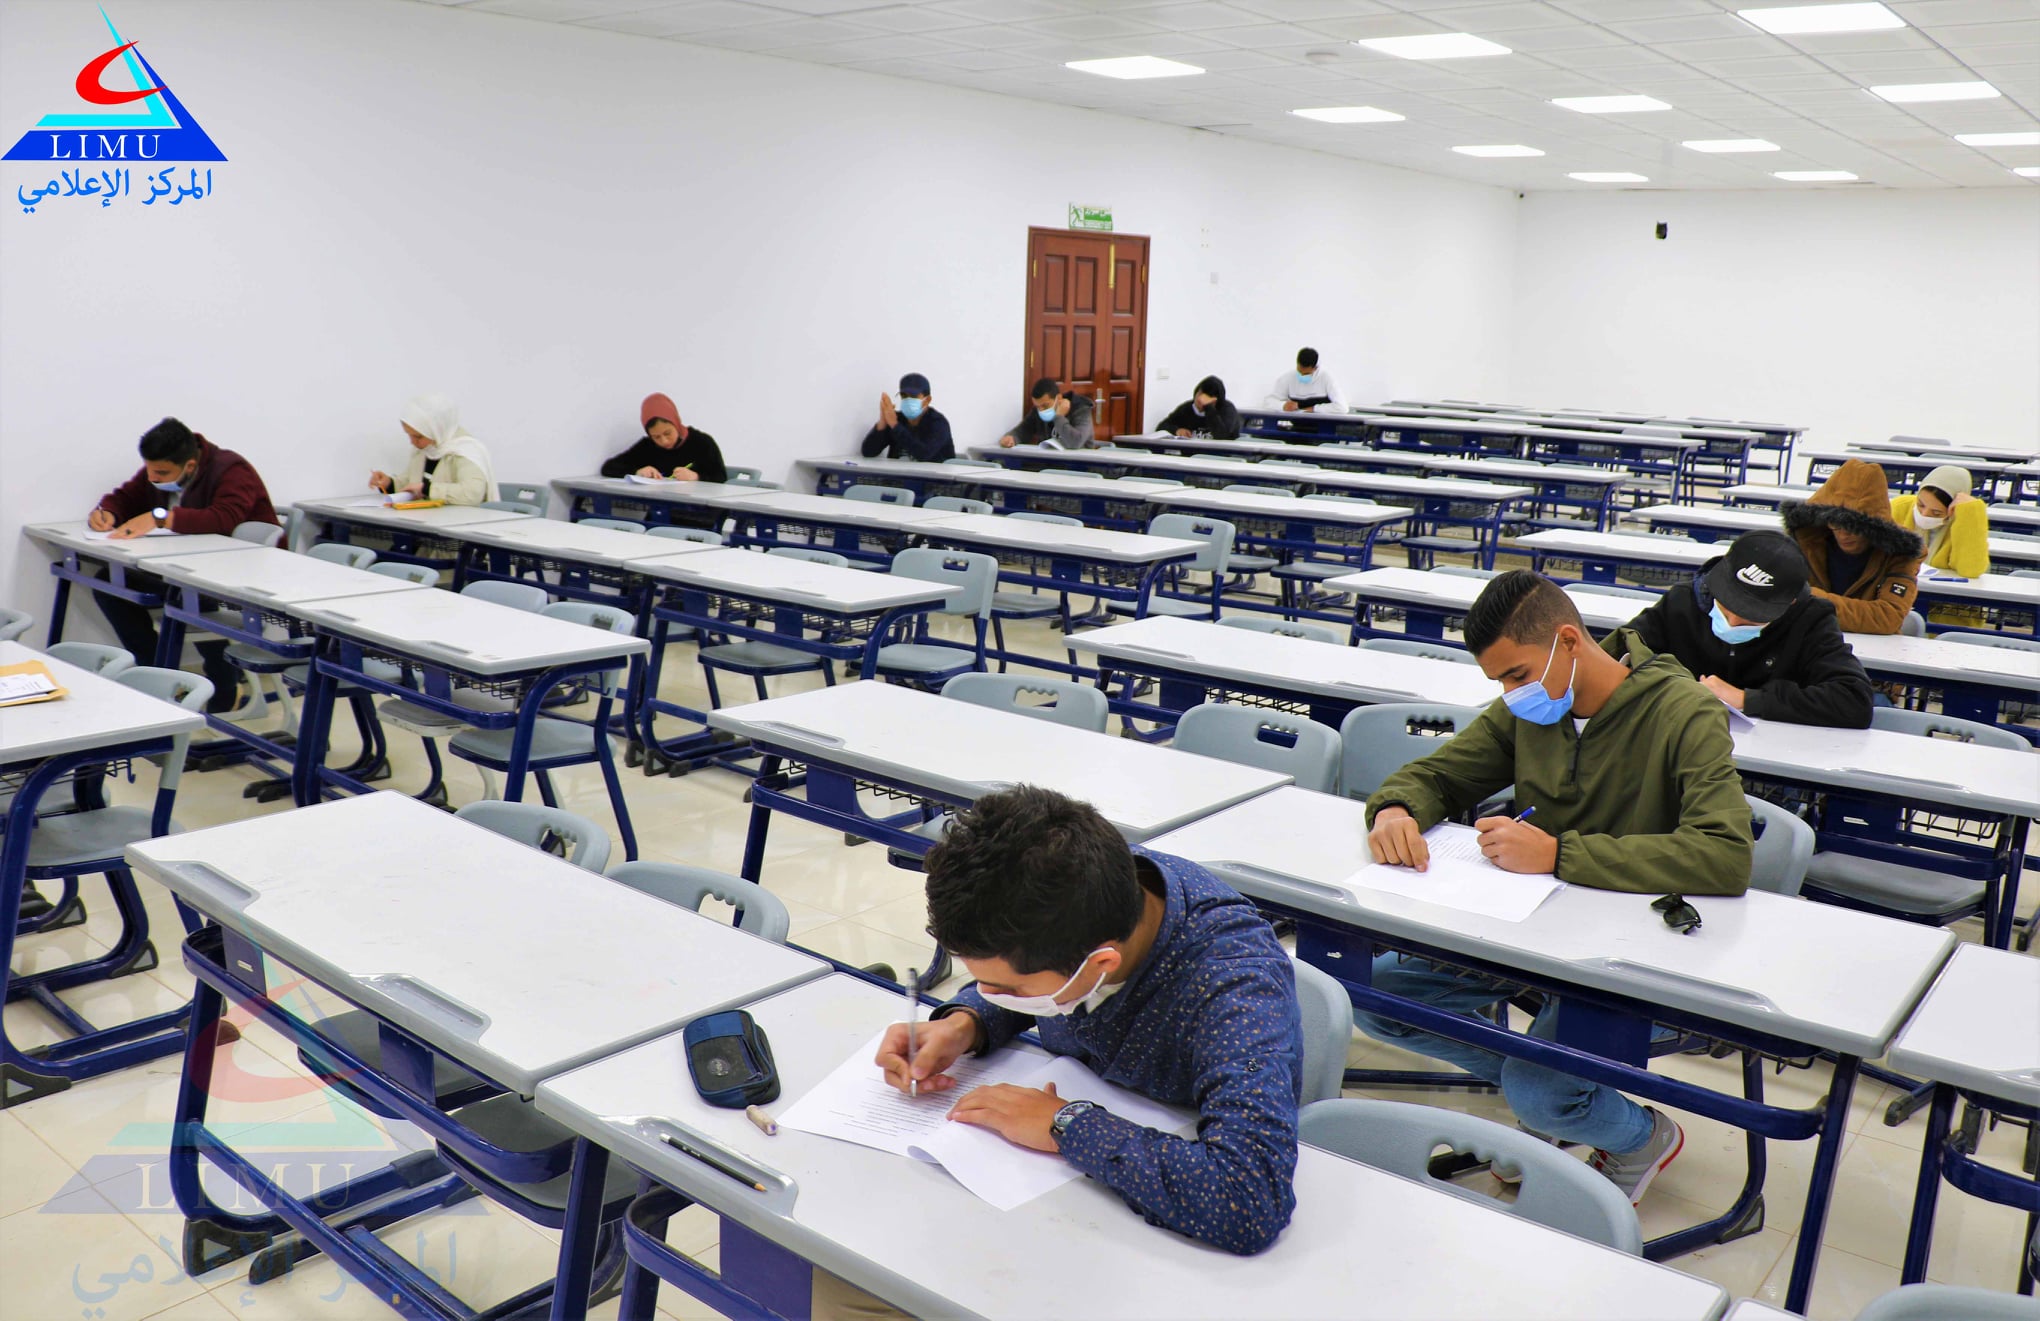 Faculty of Information Technology and Final Exams